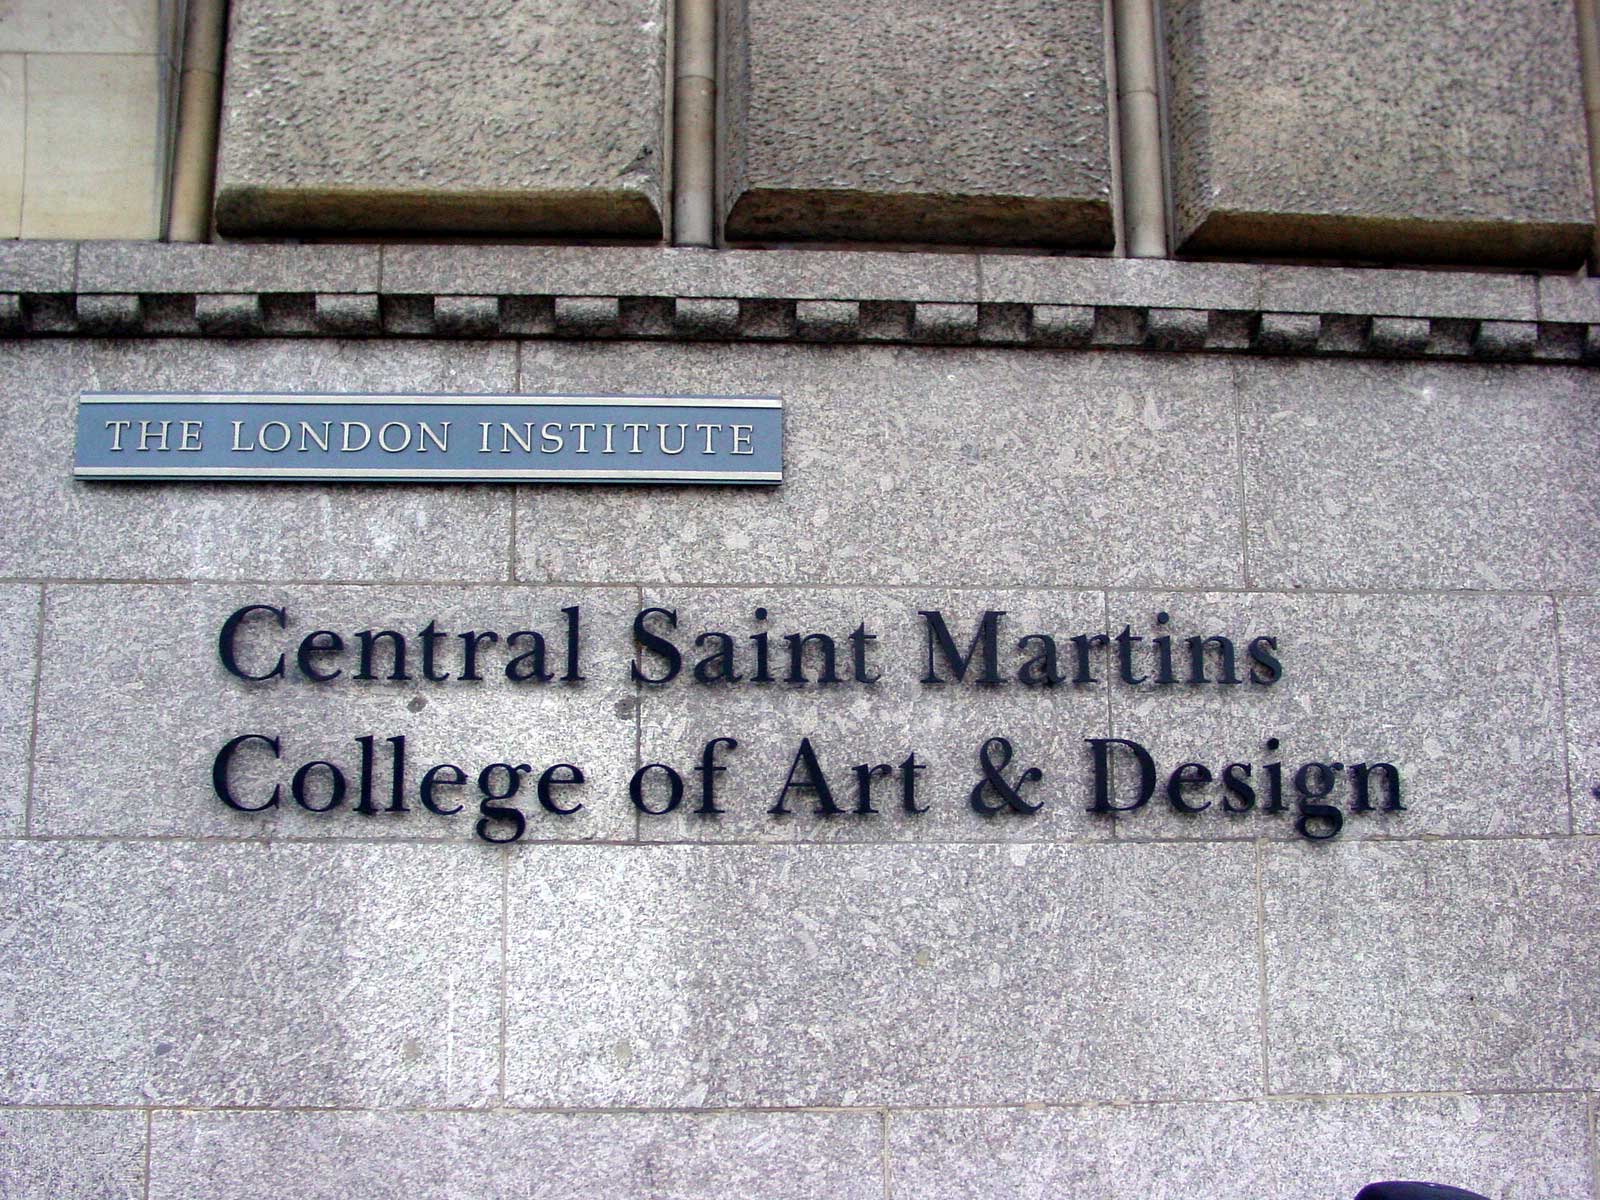 CENTRAL ST MARTINS COLLEGE OF ART - Southampton Row, London, United Kingdom  - Art Schools - Phone Number - Yelp